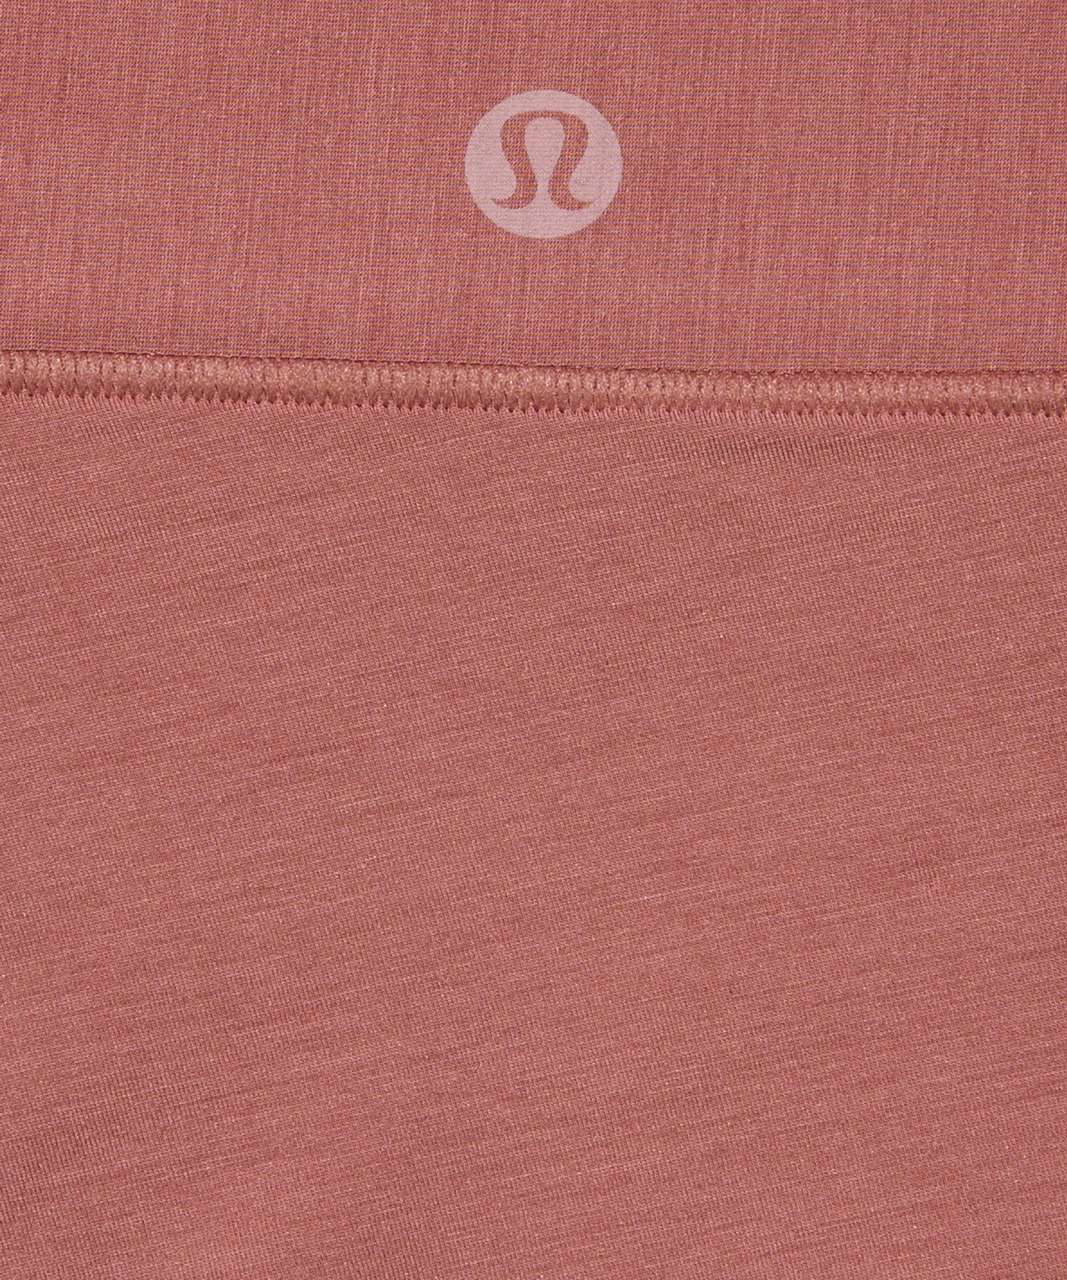 Lululemon UnderEase Mid Rise Hipster Underwear 3 Pack - Ocean Air / Spiced Chai / Gold Spice